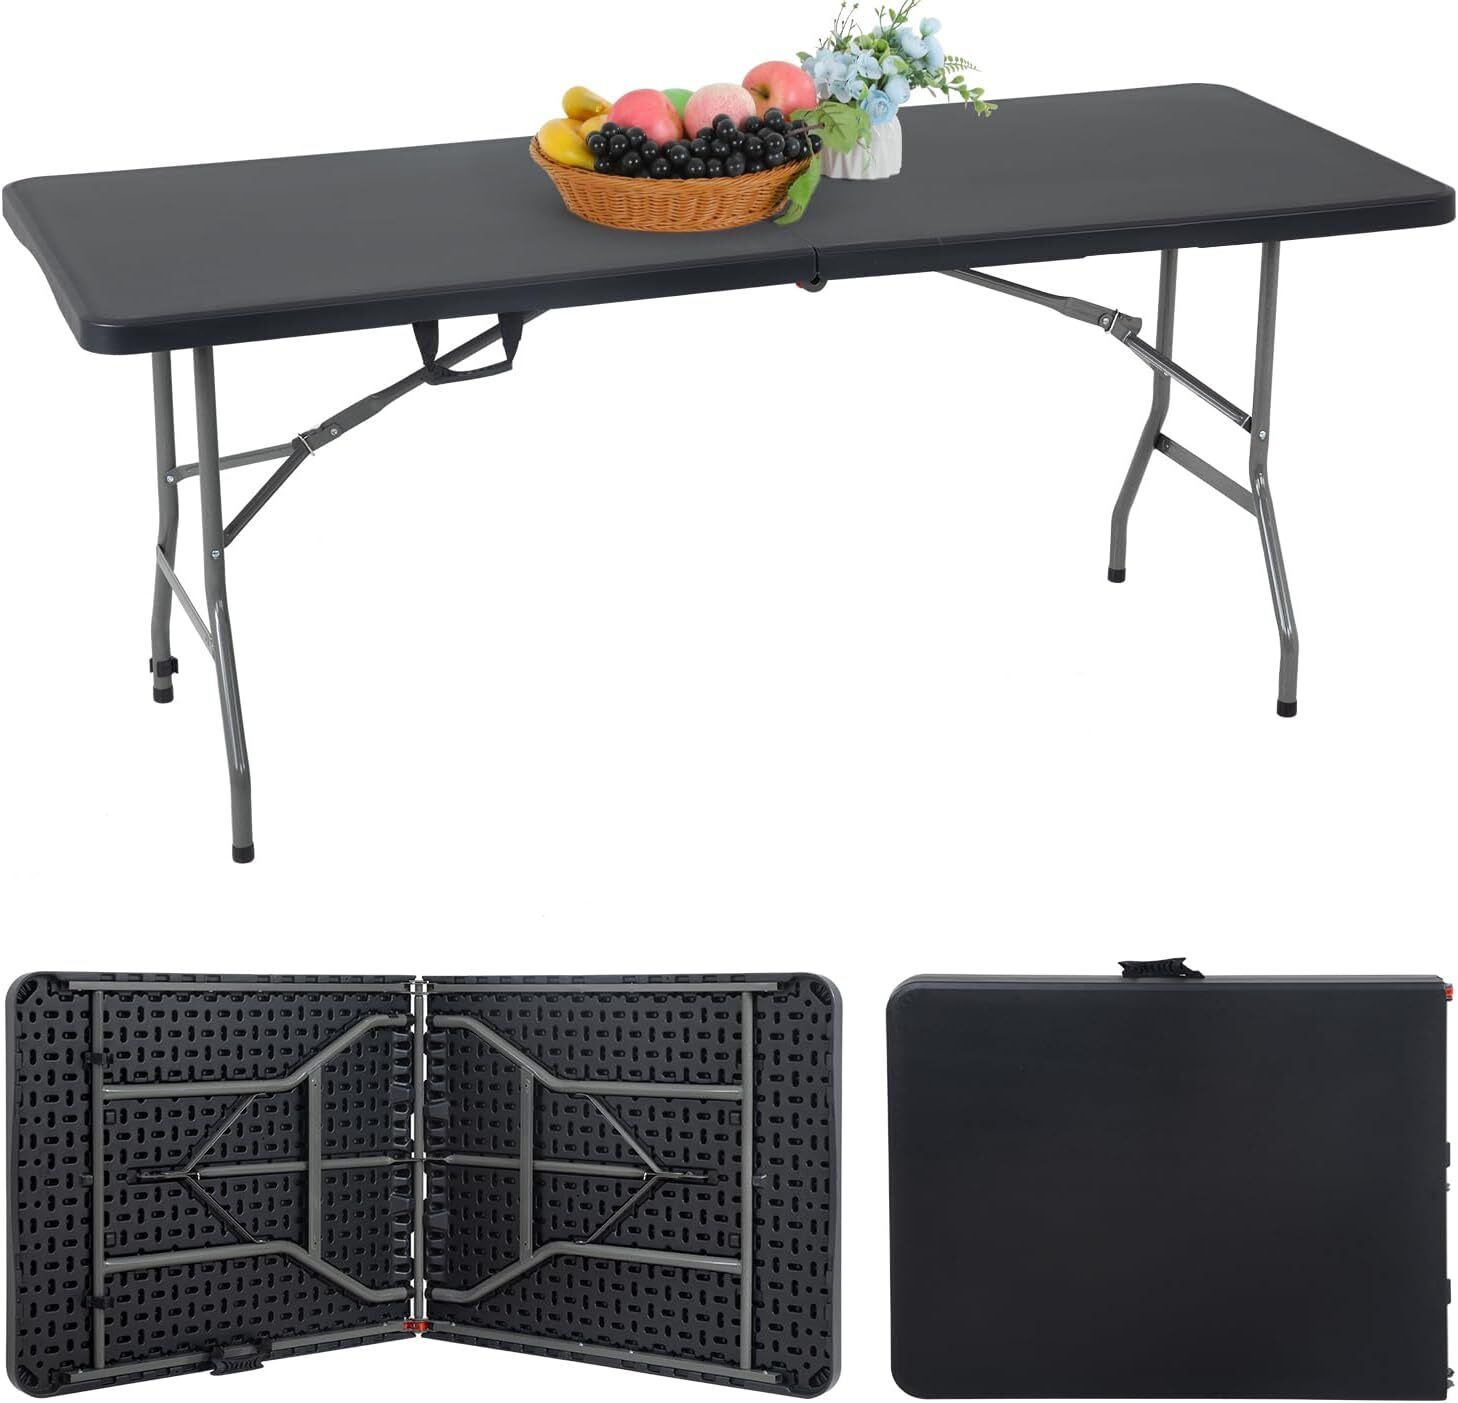 Folding Half Portable Foldable Table for Parties Backyard Events 